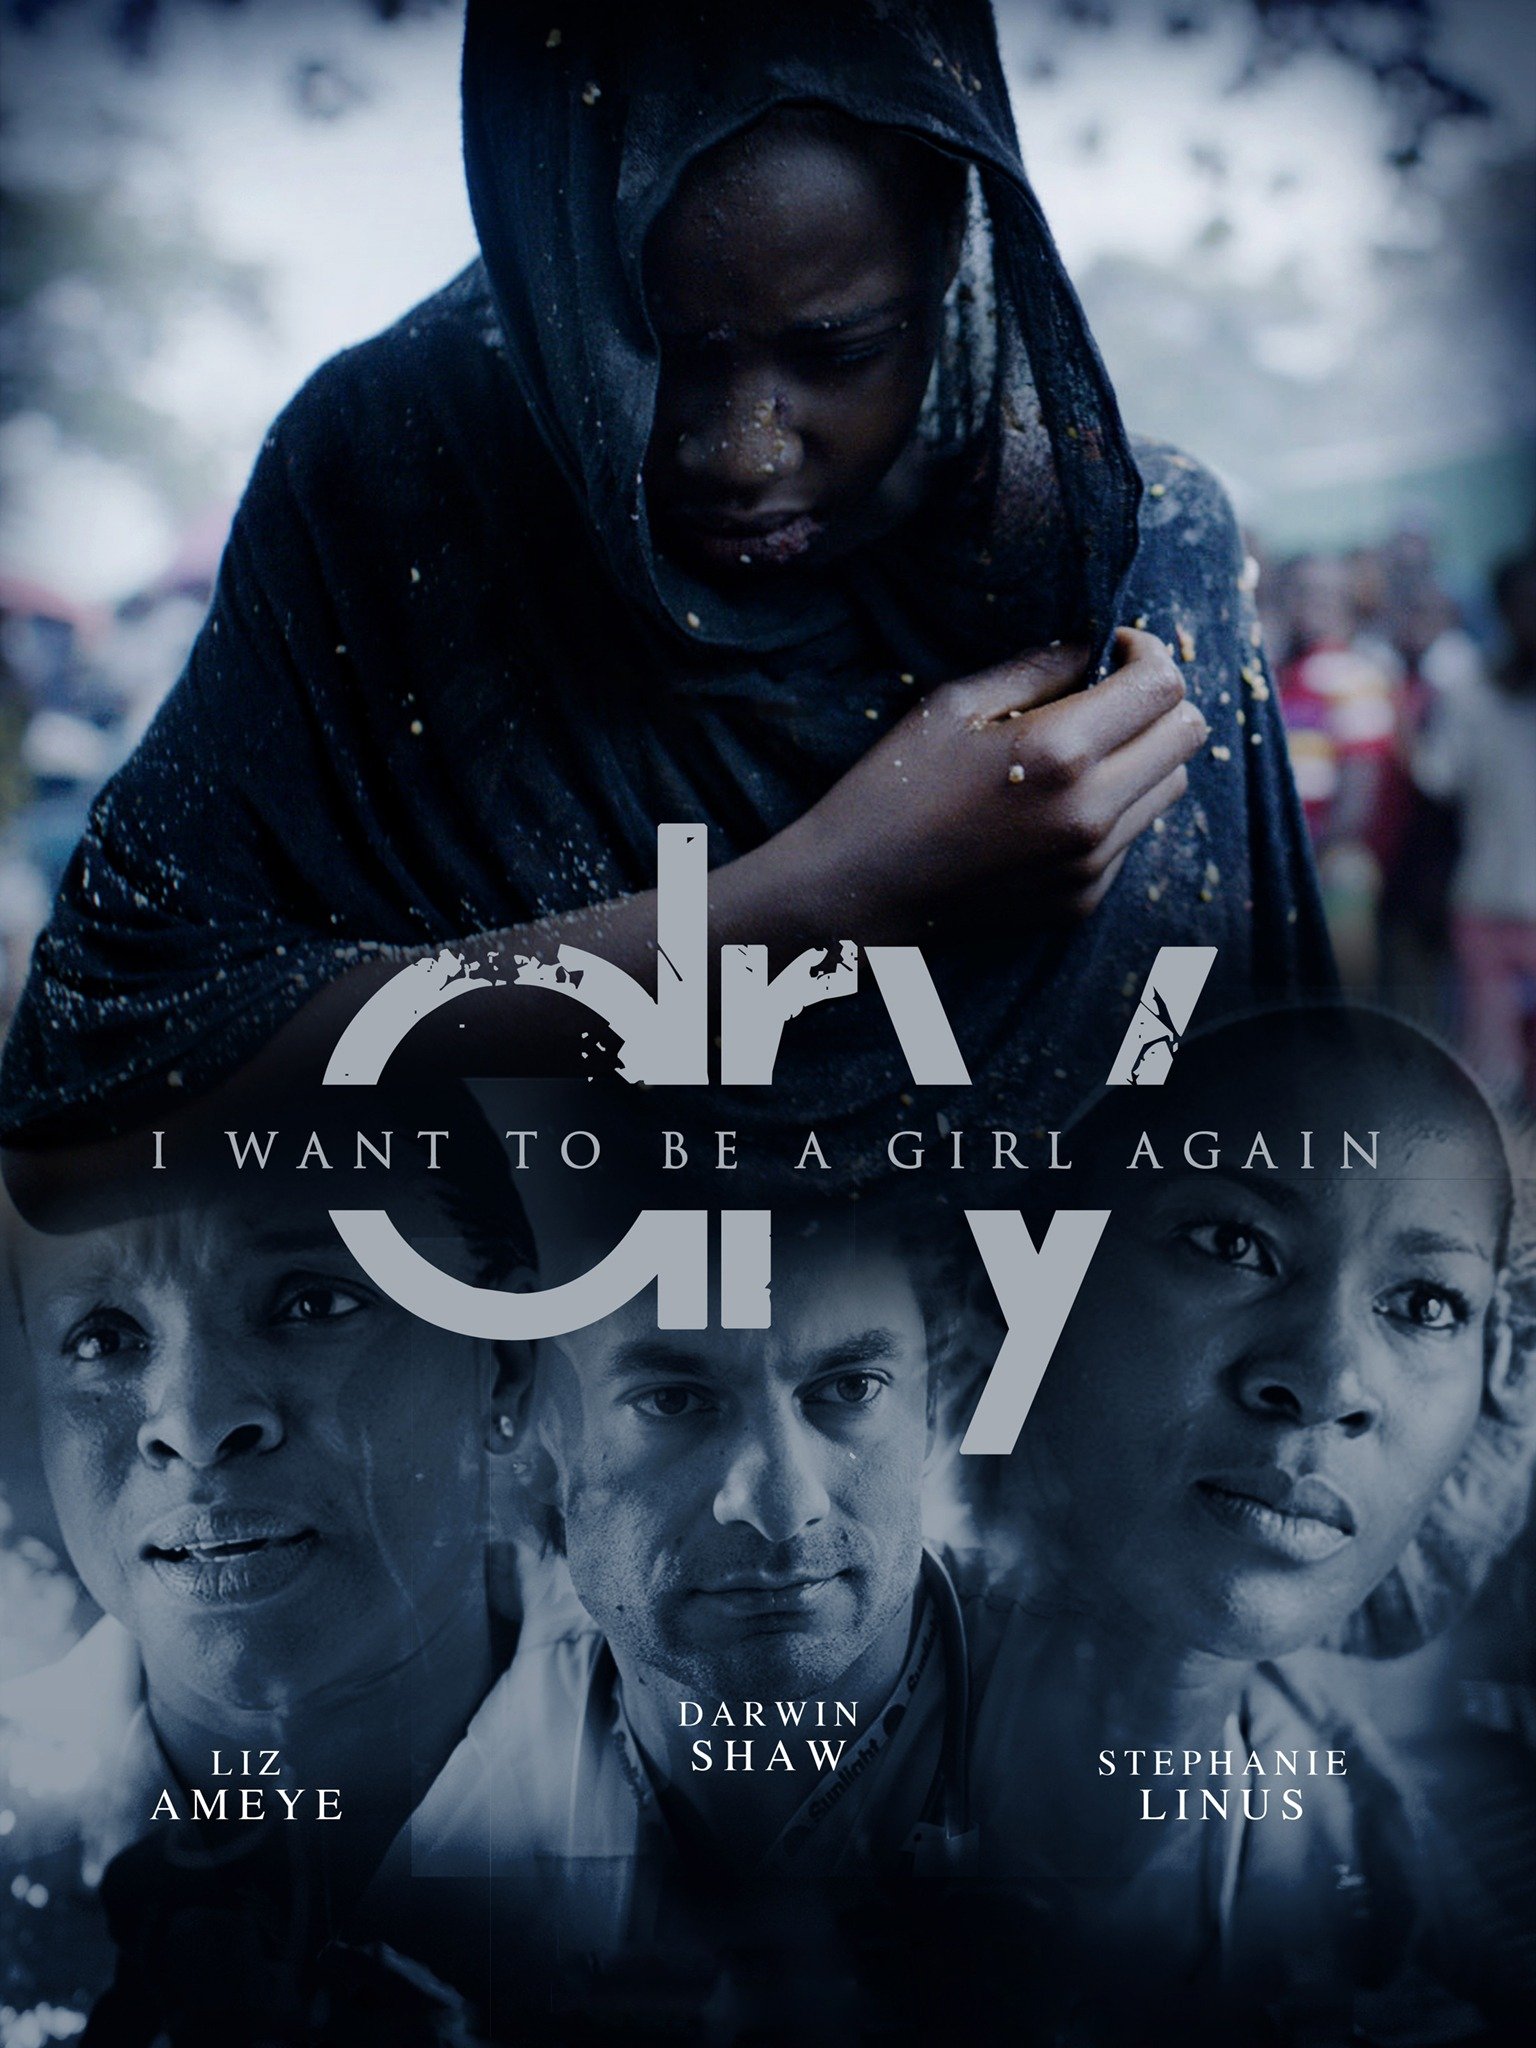 Dry (2014) - Rotten Tomatoes